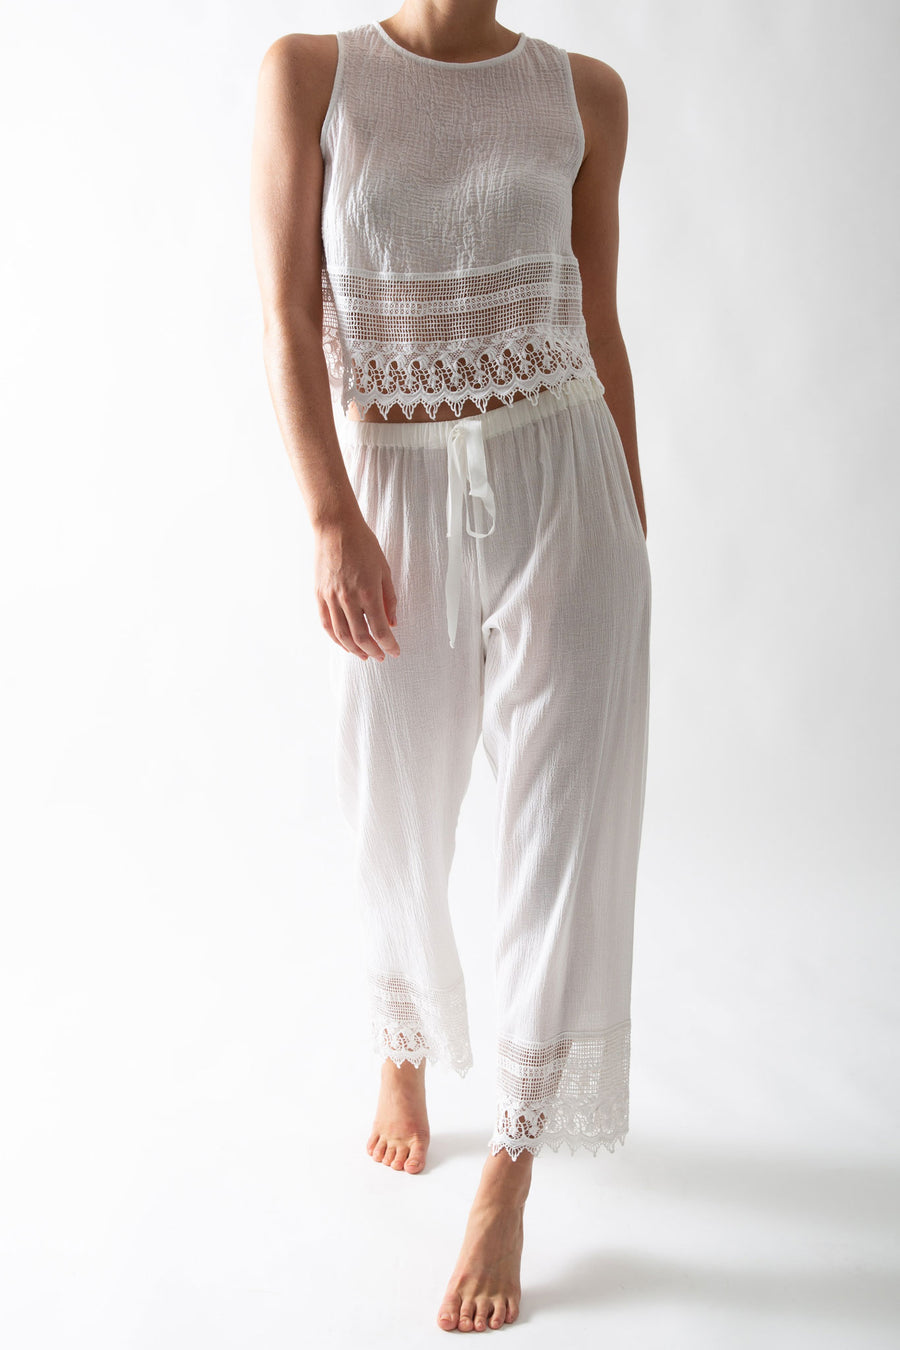 This is a photo of a woman wearing a white pair of pants with lace trim and matching white top with lace trim. The pants tie in the front.